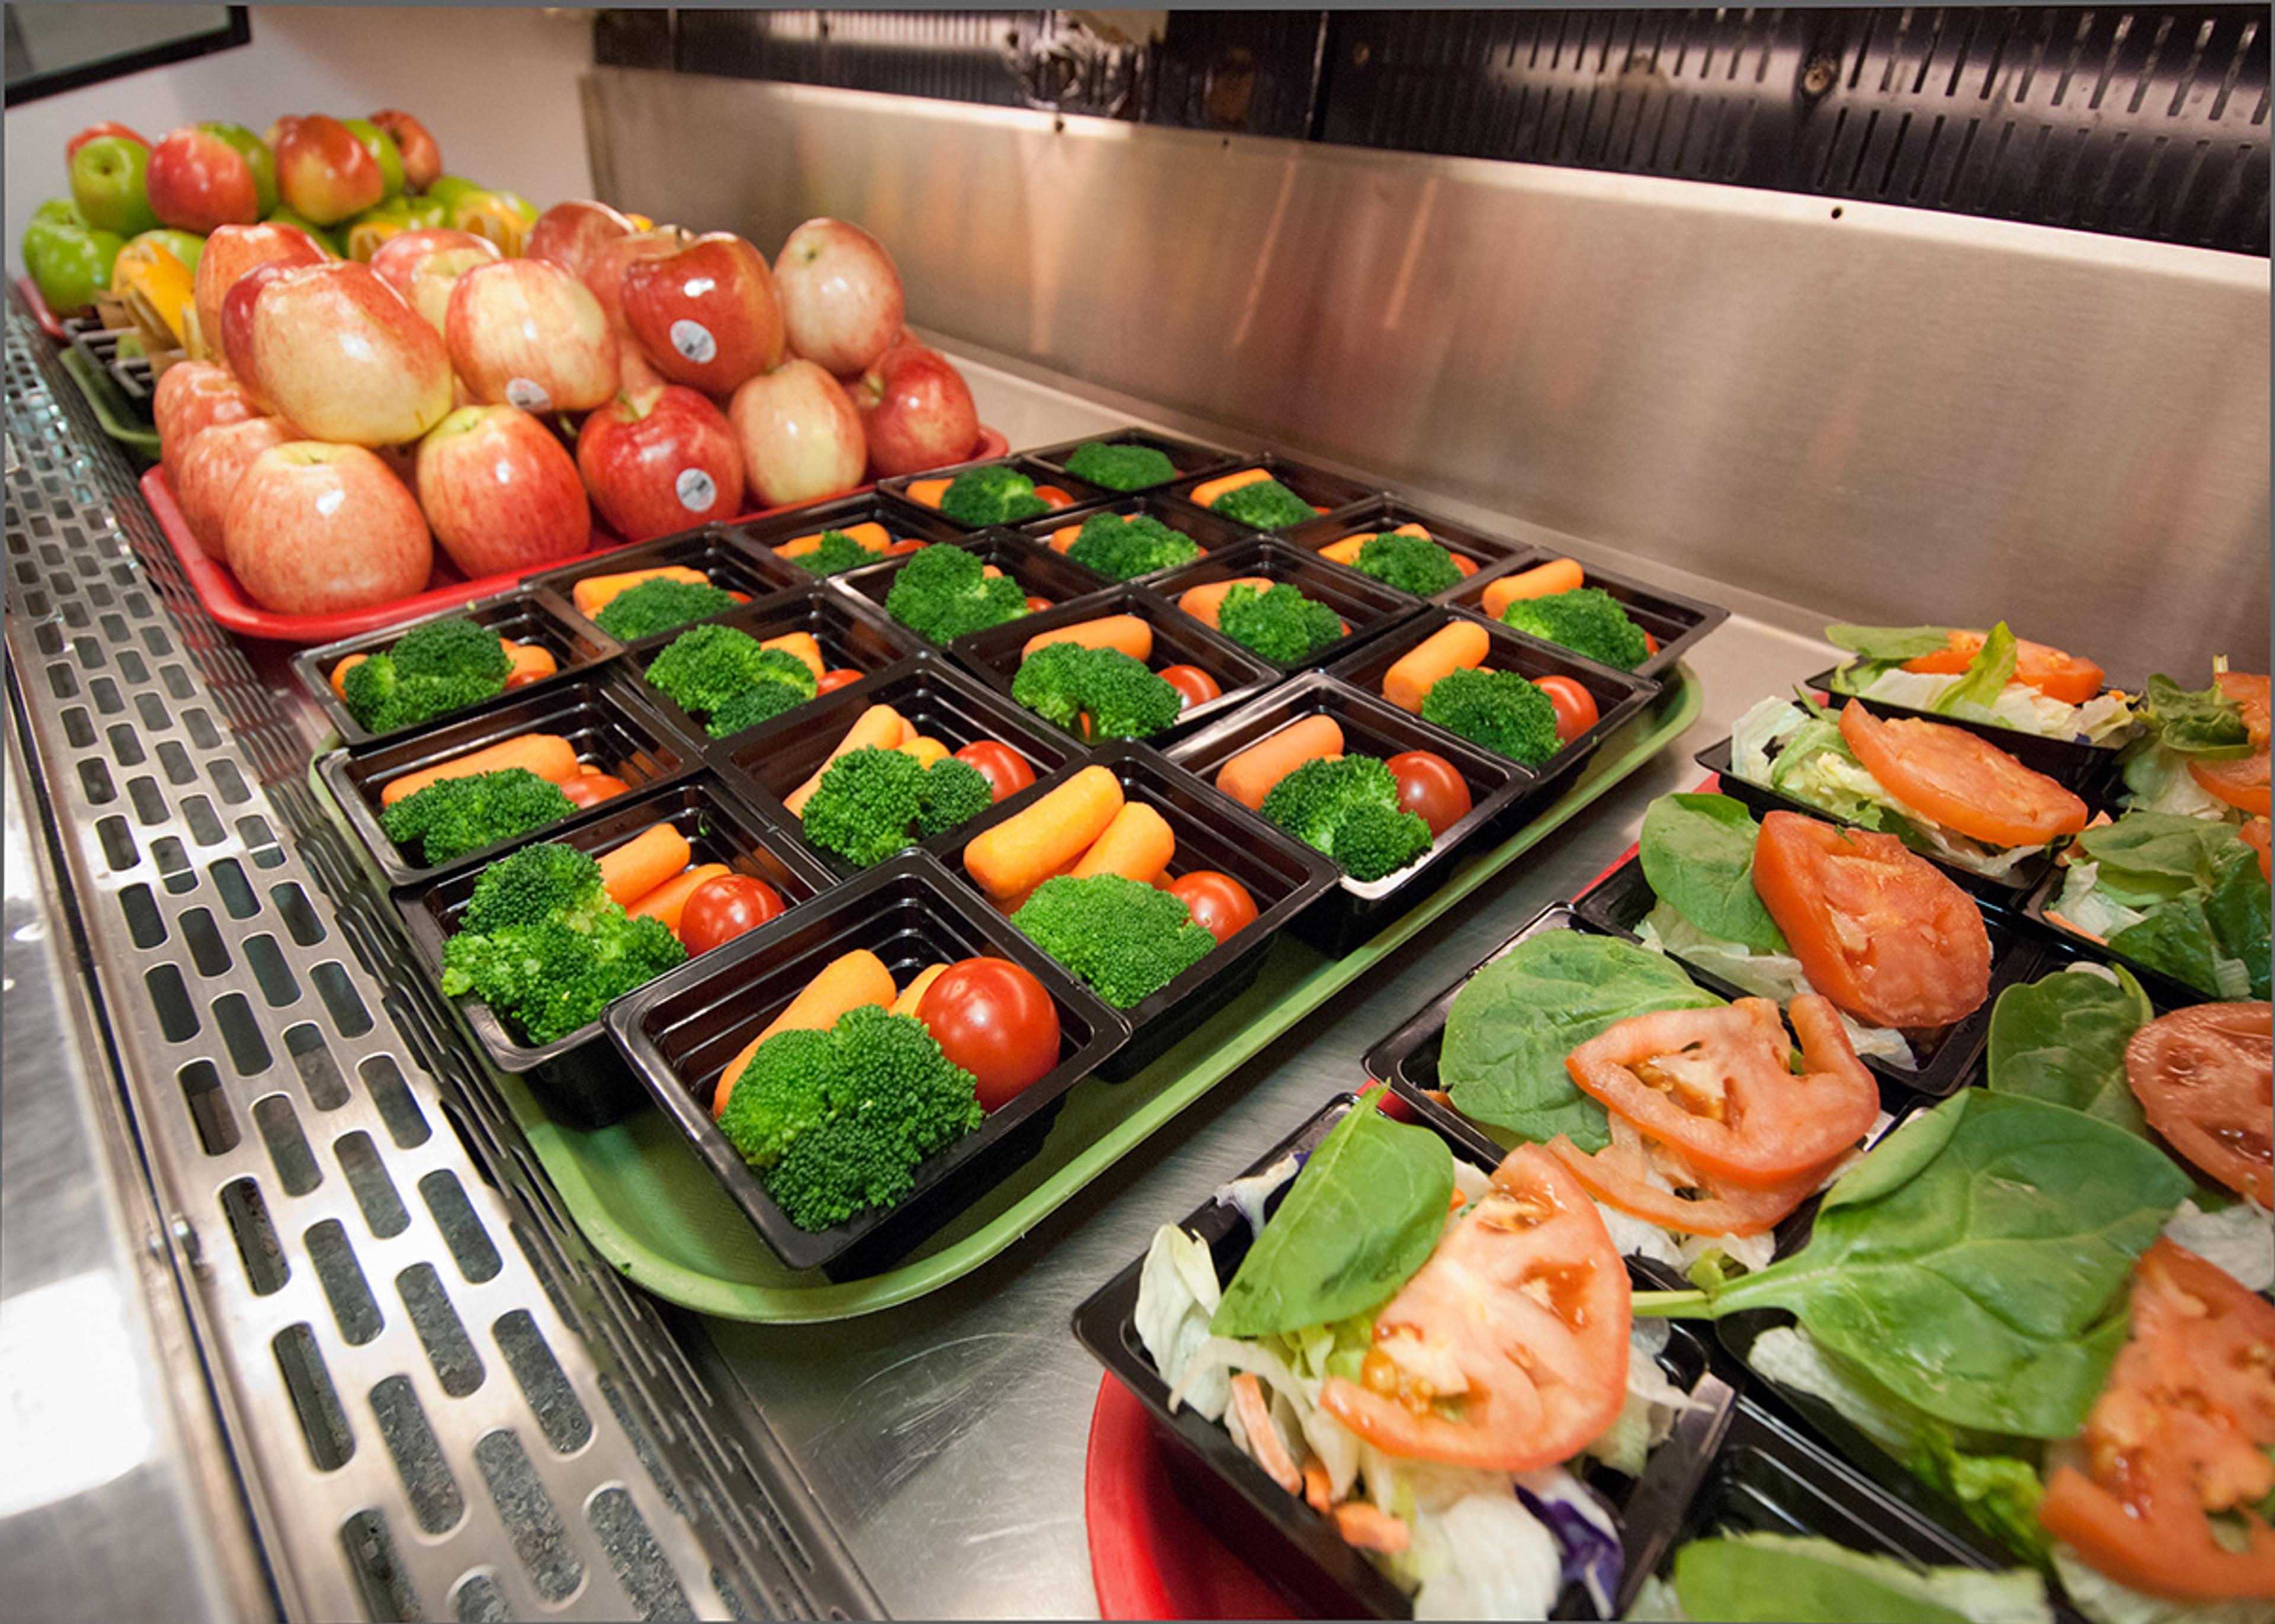 Prepared containers of colorful fresh fruits and vegetables lined up on a school lunch bar.